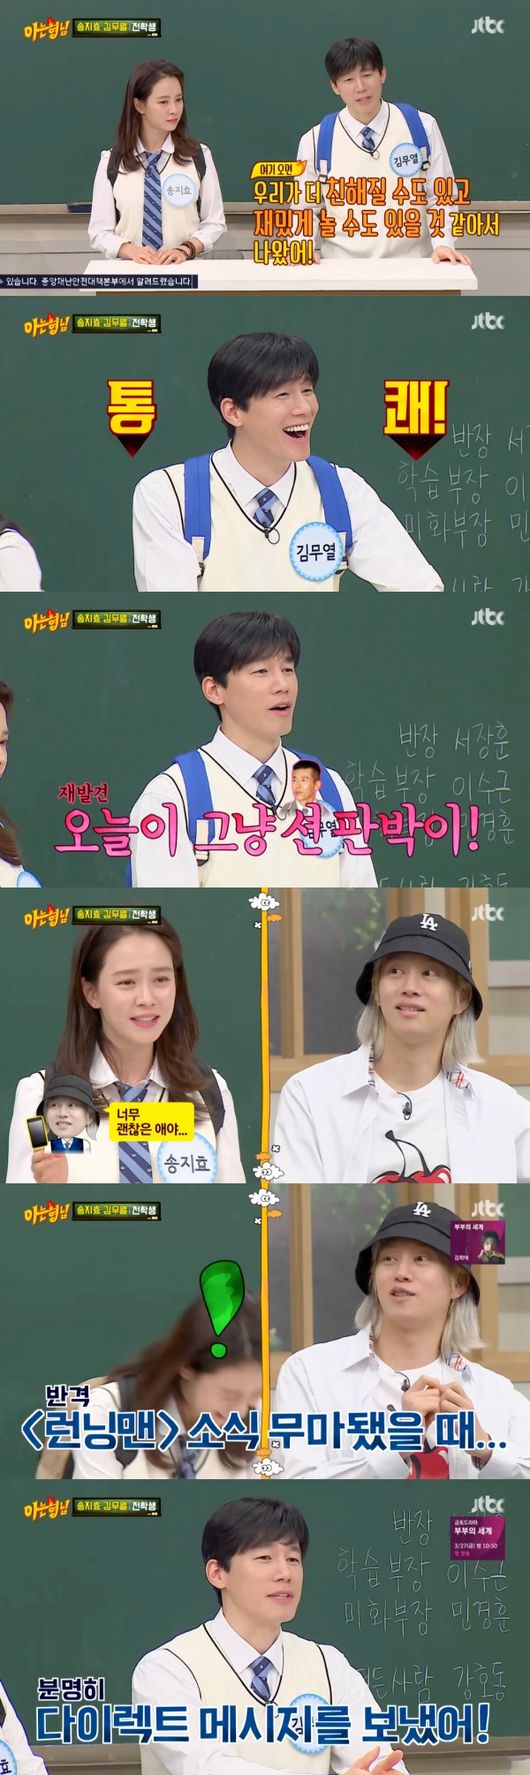 Knowing Brother Song Ji-hyo and Kim MOMO Yeol showed their affection for their fixed entertainment Running Man and wife Yoon Seung-ah.Song Ji-hyo and Kim MOMO Yeol, the main characters of the movie Invasion, appeared on the JTBC entertainment program Knowing Brother, which was broadcast on the 14th.Song Ji-hyo and Kim MOMO Yeol introduced that they were transferred from We are not very close but we will be close here.Kim MOMO Yeol worked together and asked why he was not close, It was a fight role in the movie, so there was a sense of distance.It is a concept that is half-talking, so I thought I could have fun. Kim MOMO Yeol then wrote, I write respect. I call you brother. One-year-old sister. She texted me to come soon.Dont be so squeamish, he said, laughing.The members said Kim MOMO Yeol resembled Sean, who said, Im hearing a lot about that, and I think it looks more like if I turn my head over.The members were surprised by the anti-war charm of Kim MOMO Yeol, who has been playing a big villain, and Kim MOMO Yeol added, I unwind it with acting.Song Ji-hyo and Kim MOMO Yeol pointed to Kim Hee-chul in a request to pick up a lover among the members.Song Ji-hyo mentioned the texts Kim Hee-chul shared after admitting to being in love with MOMO.Song Ji-hyo said, I left a letter saying I congratulated him. Hee-chul replied Thank you sister.MOMO is a very good girl, he said.Kim MOMO Yeol, who married actor Yoon Seung-ah, is also well known as a lover.In particular, Kim MOMO Yeol has unintentionally started public devotion by posting a message that he was going to send to Yoon Seung-ah personally.Kim MOMO Yeol said: It was a time when I was doing a lot of Twitter, obviously I sent direct messages and even checked, but I sent them in public messages, so I erased them right away.I did not think anyone saw it, but I thought it would appear on the feed of others. I was the only one who had the capture.Then, regarding the response of Yoon Seung-ah, When the article broke, my wife was filming; I couldnt get in touch for six to seven hours; I was nervous because there was no way to stop it.I was so happy because it was wrong to say goodbye, but I said coolly, I do not have a public love for this.Kim MOMO Yeols message was full of emotions like literary works, and Kim MOMO Yeol said, It is the time when the role was a novelist and wanted to write poetry.It was when I was drunk with the sensibility that I wore with my poetry. Kim MOMO Yeols writing skills, which he later nicknamed Shakespeare of Light, were hereditary: Kim MOMO Yeols mother is working as a novelist.Kim MOMO Yeol has also attracted attention by saying that he wrote the ambassador of the movie honest candidate.Kim MOMO Yeol said, The honest candidate is a Brazilian film. The director has received permission to adapt and adapt.Ive been used because the coach is good, he said.Song Ji-hyo is excited by Lee Soo-geuns provocation and showed affection for the performing arts Running Man.Song Ji-hyo said, Lee Kwang-soo should not be to Seo Jang-hoon.Kim Jong-guk also said, Kang Ho-dong wins all, Lee Soo-geun said. People who sit in class are only people.Song Ji-hyo said, Park Jae-seok brother, come on, lets kick him, as Lee Soo-geun sniped Running Man during the scissors rockbo game.Kang Ho-dong then laughed, saying, Park Jae-seok is burdensome and ask him to send it to the miscarriage.Kim MOMO Yeol confessed his relationship with broadcaster Boom and singer Rain, who said: Im from Anyang High School; boom and rain are motives.I danced Lula when I went on a school trip with Rain. Asked who was the most popular, he said, Boom was popular. I made my debut first, and girls came to me.I shouted Minho brother and I brought a placard, he replied.Tell me, time went on, Kim MOMO Yeol asked who the most memorable business card he had ever received was from.The answer was the business card of Ma Dong-Seok, director of the Korean Arm Ssireum Federation.When Kim MOMO Yeol asked if he had wrestled with Ma Dong-Seok, he said, I did not even play with a joke.Why not? There was a scene of a bad man shooting, when he wore a leather jumper and was torn to the shape of Ma Dong-Seoks hand.  (Ma Dong-Seok) always has a grip, it was time to go 20kg more and get a lot of exercise, but I couldnt (even if I tried), he said.The next question was: Whats the most embarrassing thing to come here today? the answer was answered by Lee Sang-min.As soon as Kim Hee-chul came in, the problem that he had prepared for the moment he was like Sean flew away, Lee Sang-min said.Kim MOMO Yeol bought a lot of Misunderstood with a look that resembles Sean; Kim MOMO Yeol said, Sometimes you ask, That donation angel?I live a lot of Misunderstood, and sometimes I can say Uh, its Sean so I can hear him walking along the street with his wife.Kim MOMO Yeol also said that he had been talked about in a similar way to Ong Sung Woo. Kim MOMO Yeol said in Lee Soo-geuns play There is no personality that it is a little common and there is no personality.It seems to be an advantage when acting. Song Ji-hyo presented the absurdity of drinking as a problem.Song Ji-hyo has once put his drunken naked socks in the lighting directors padding pocket, Confessions have said.Song Ji-hyo said, I was drunk and my feet were so frustrated. I put it in my padding pocket in the padding pocket of the lighting director next to me.When the director of the lighting heard that I was looking for him, he sucked his socks and put them in a zipper bag.Capture the broadcast screen of Knowing Brother.